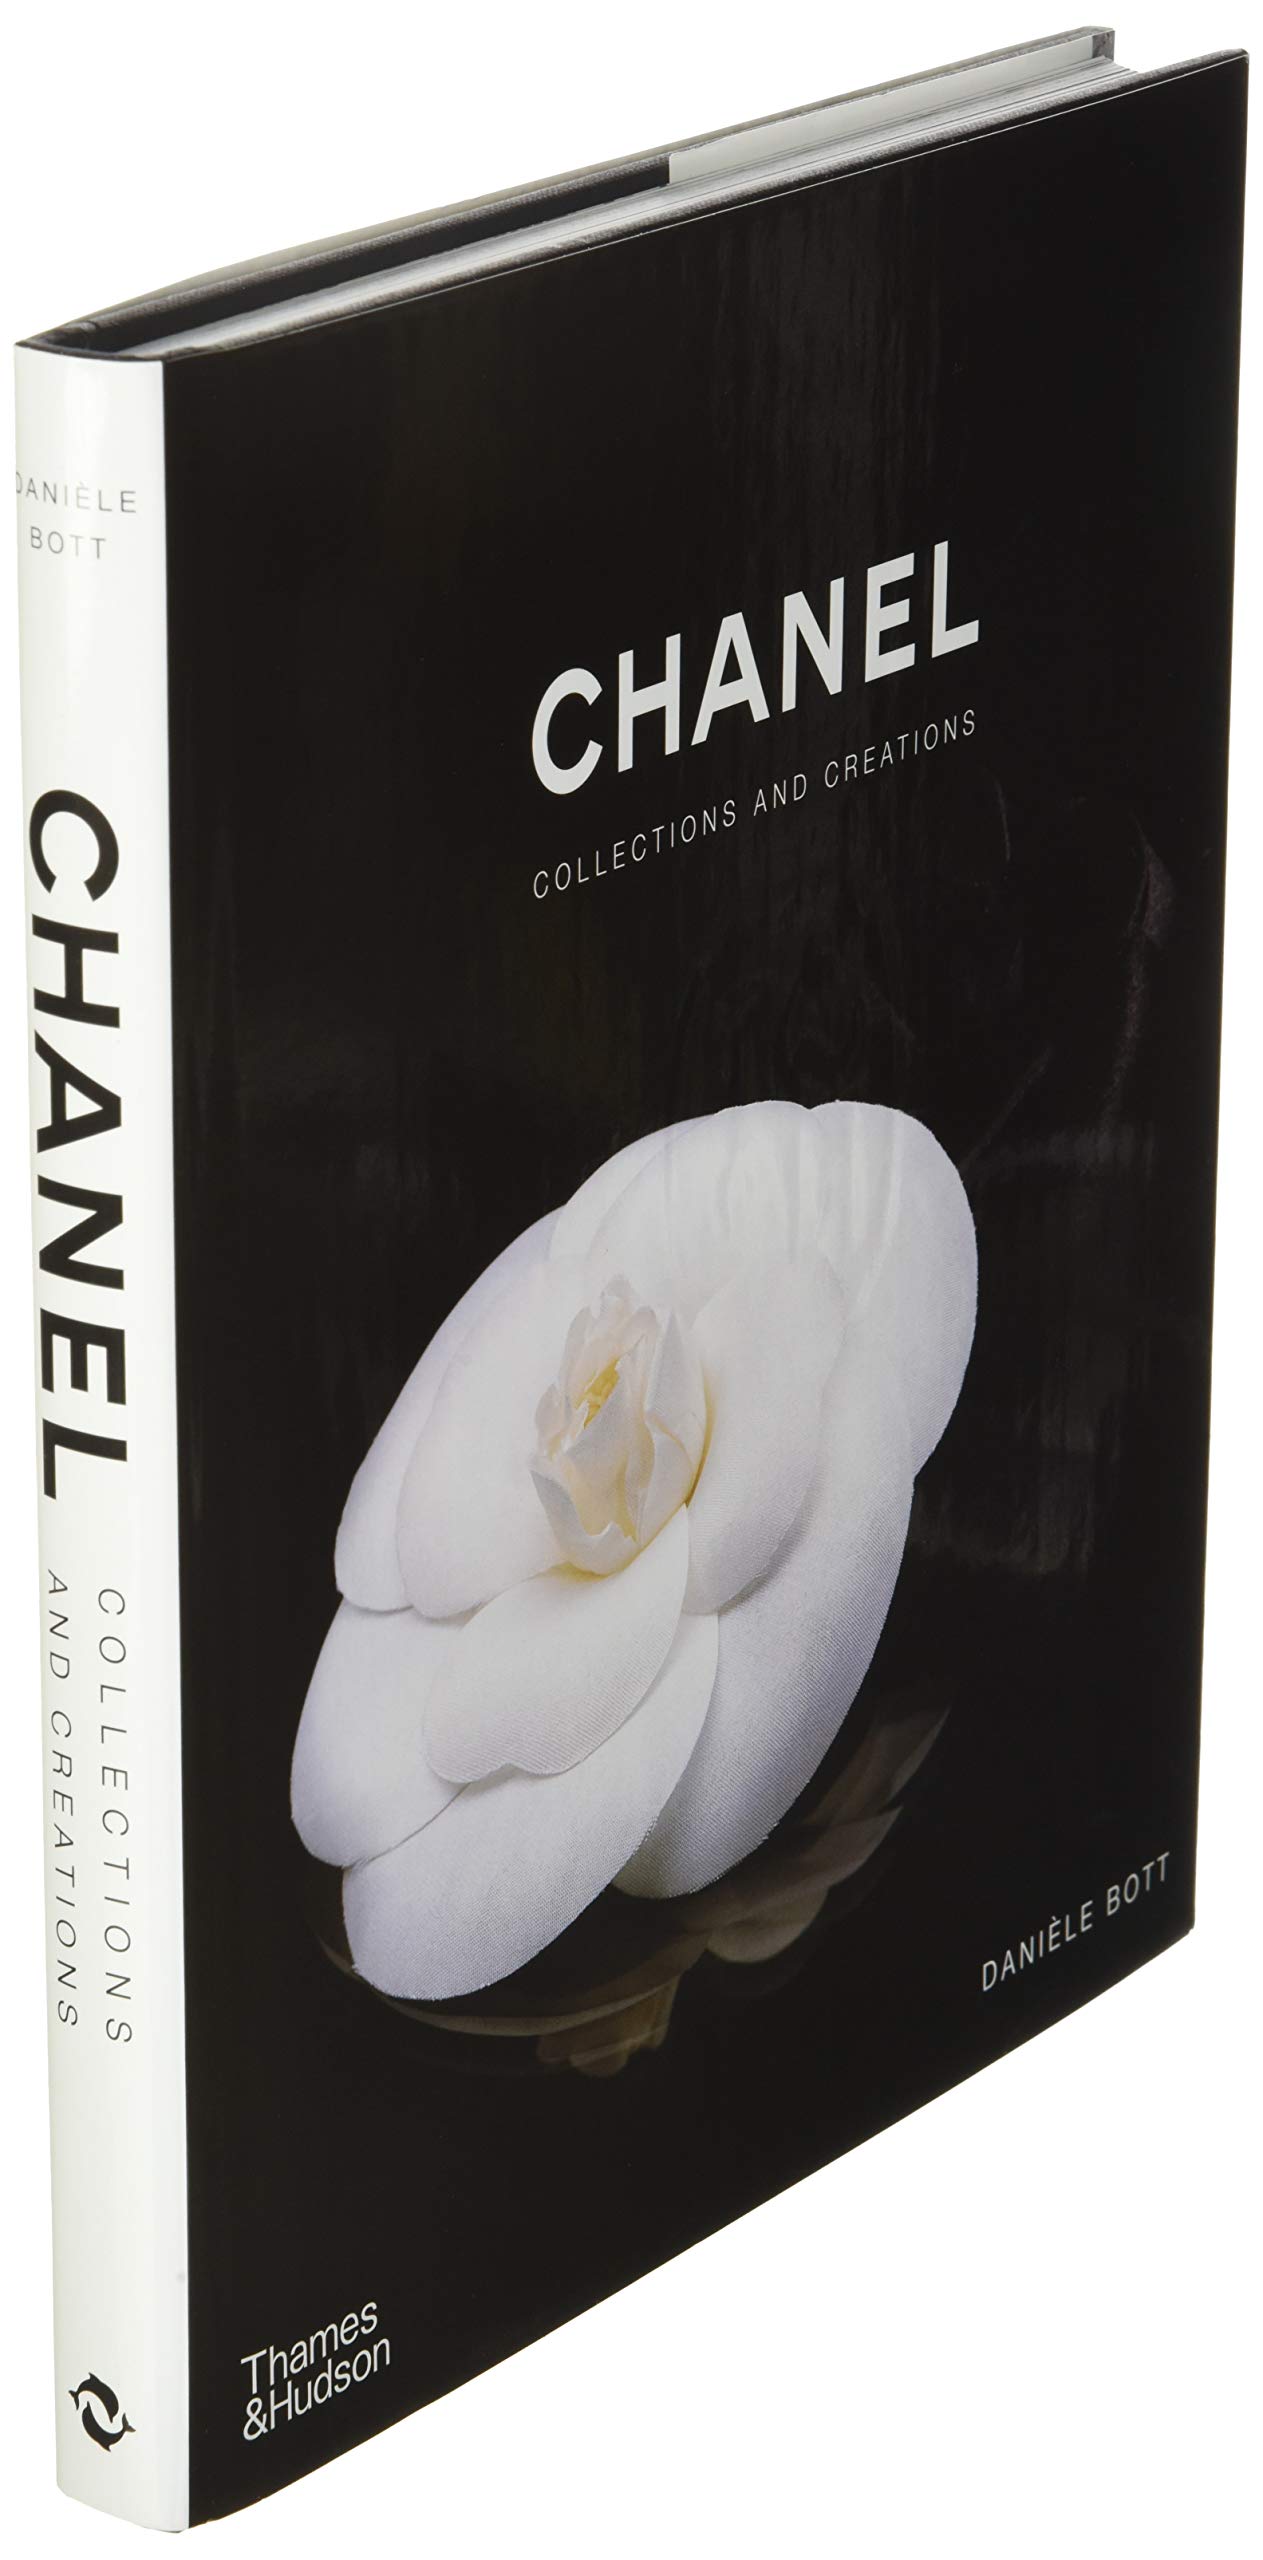 Top 96+ imagen chanel collections and creations book